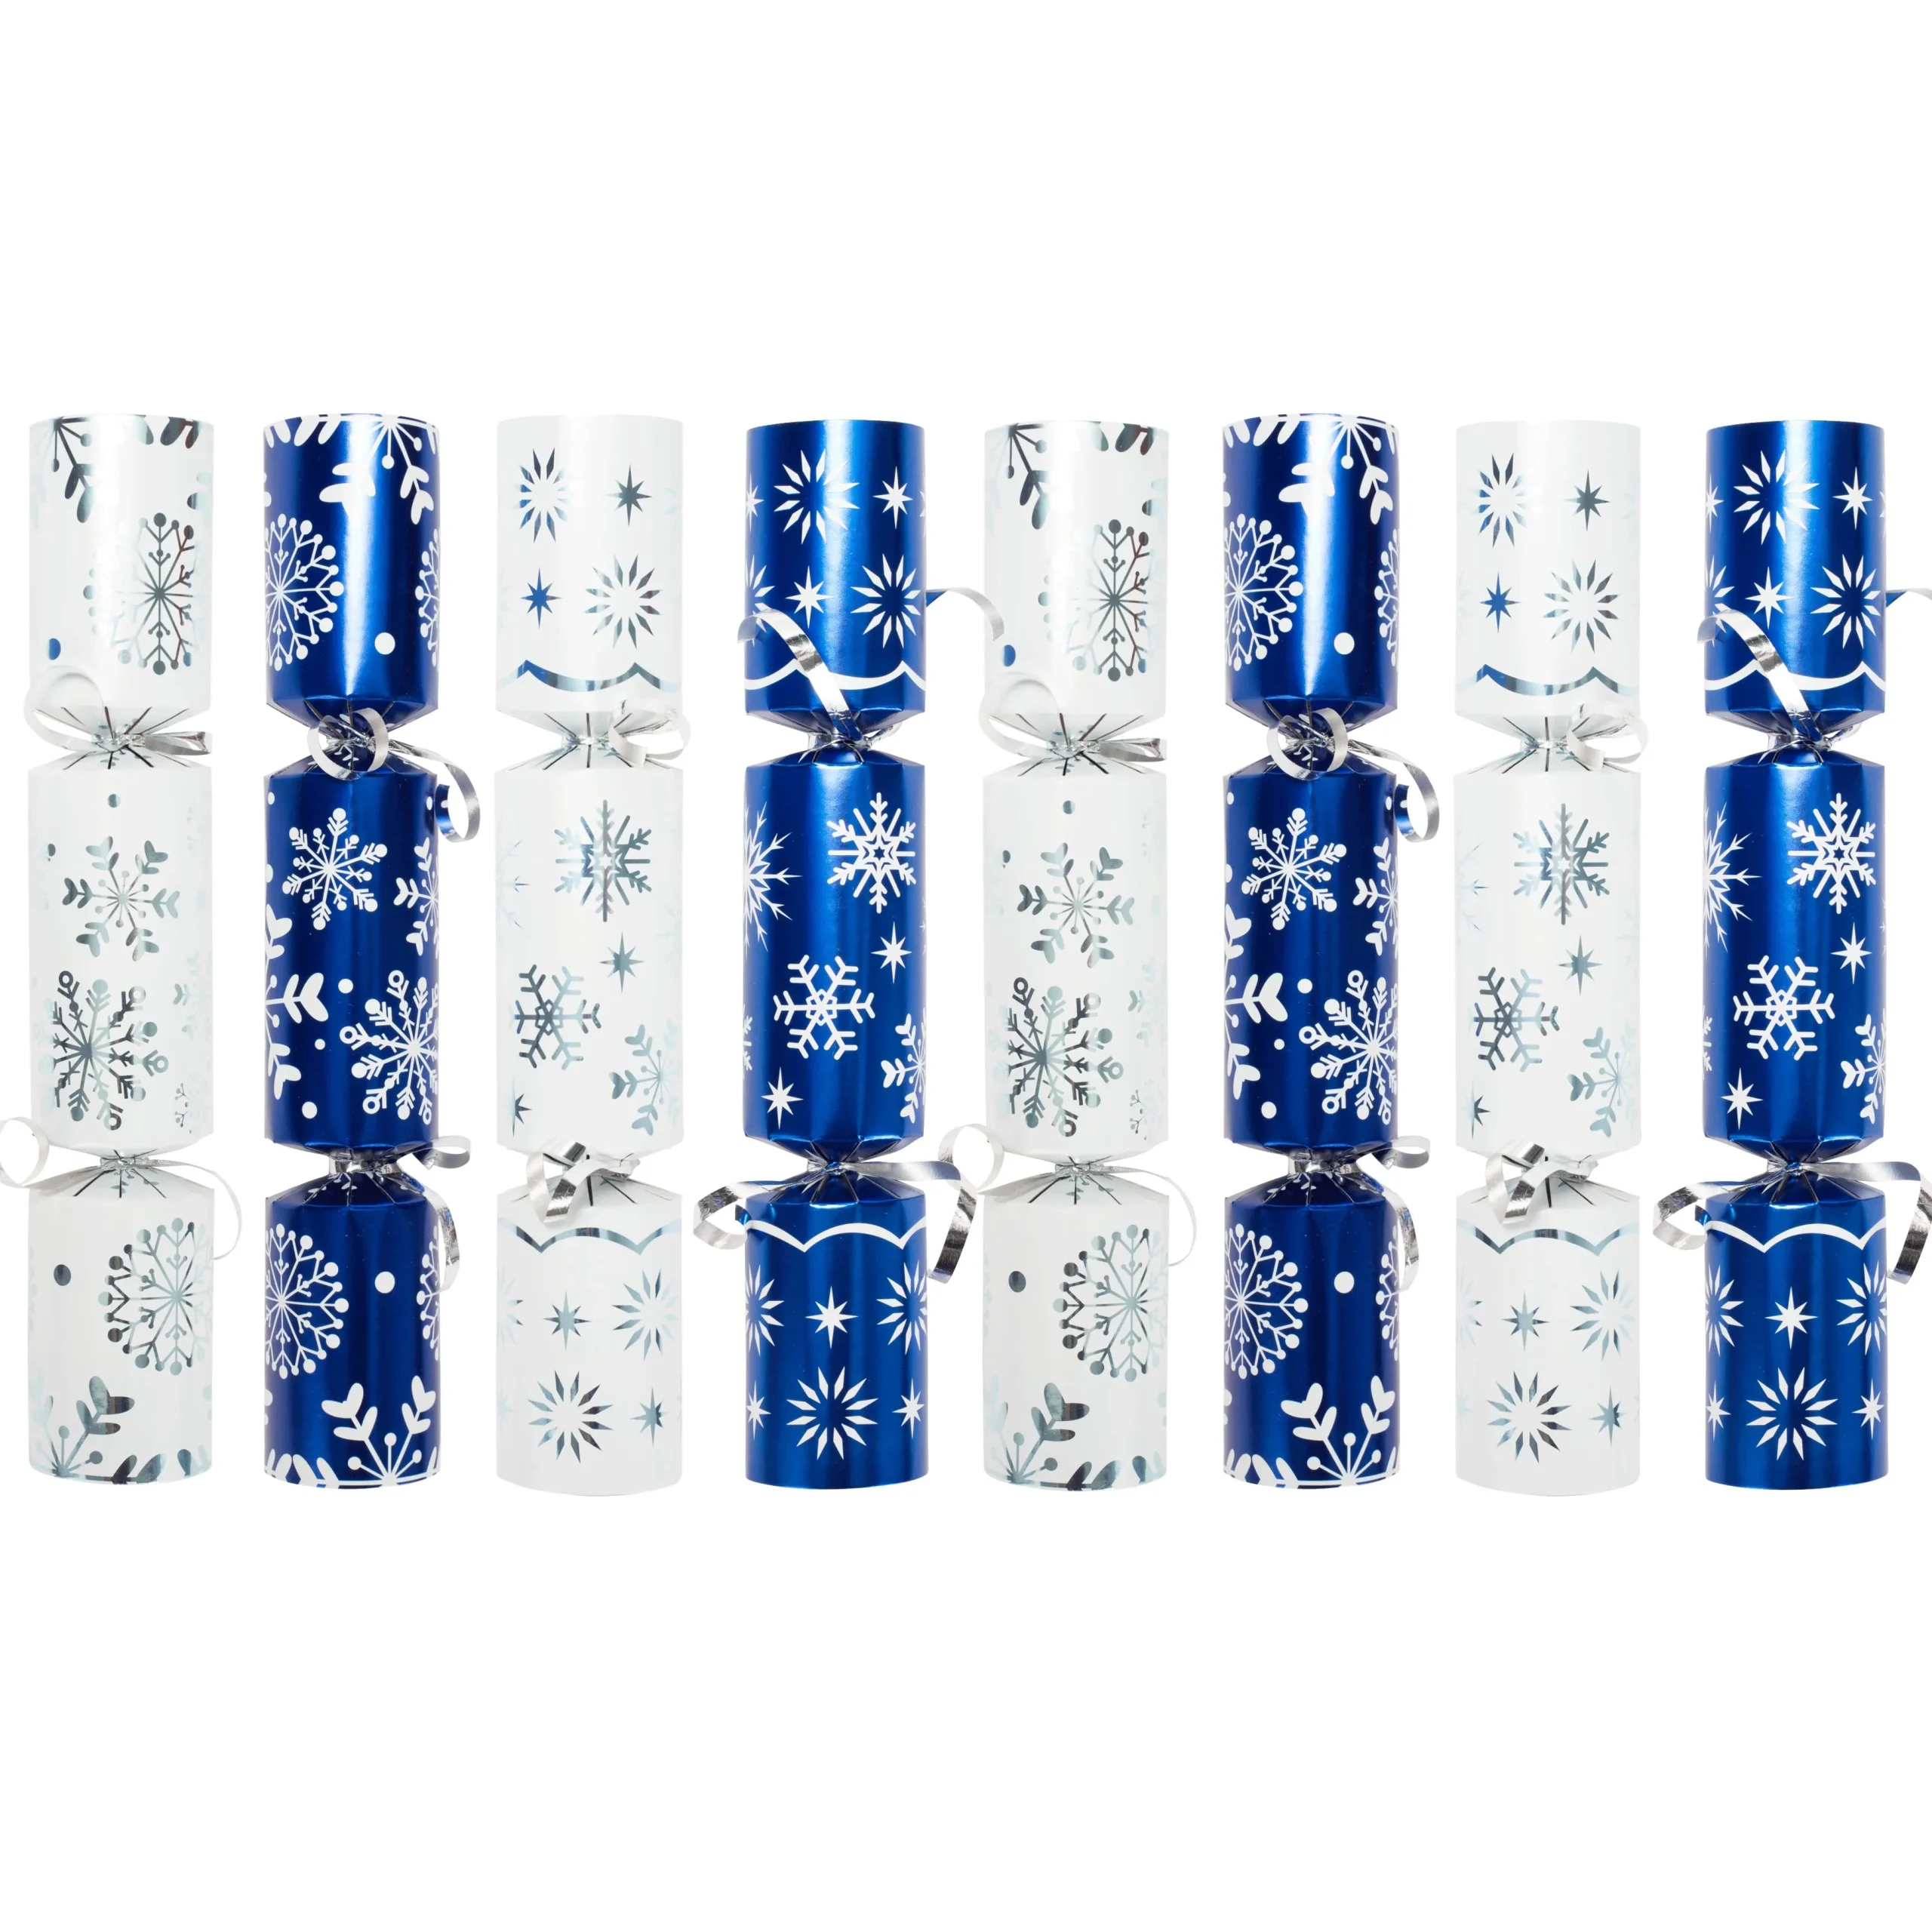 Fun 8pcs Blue and White Snowflake Christmas Party Favors